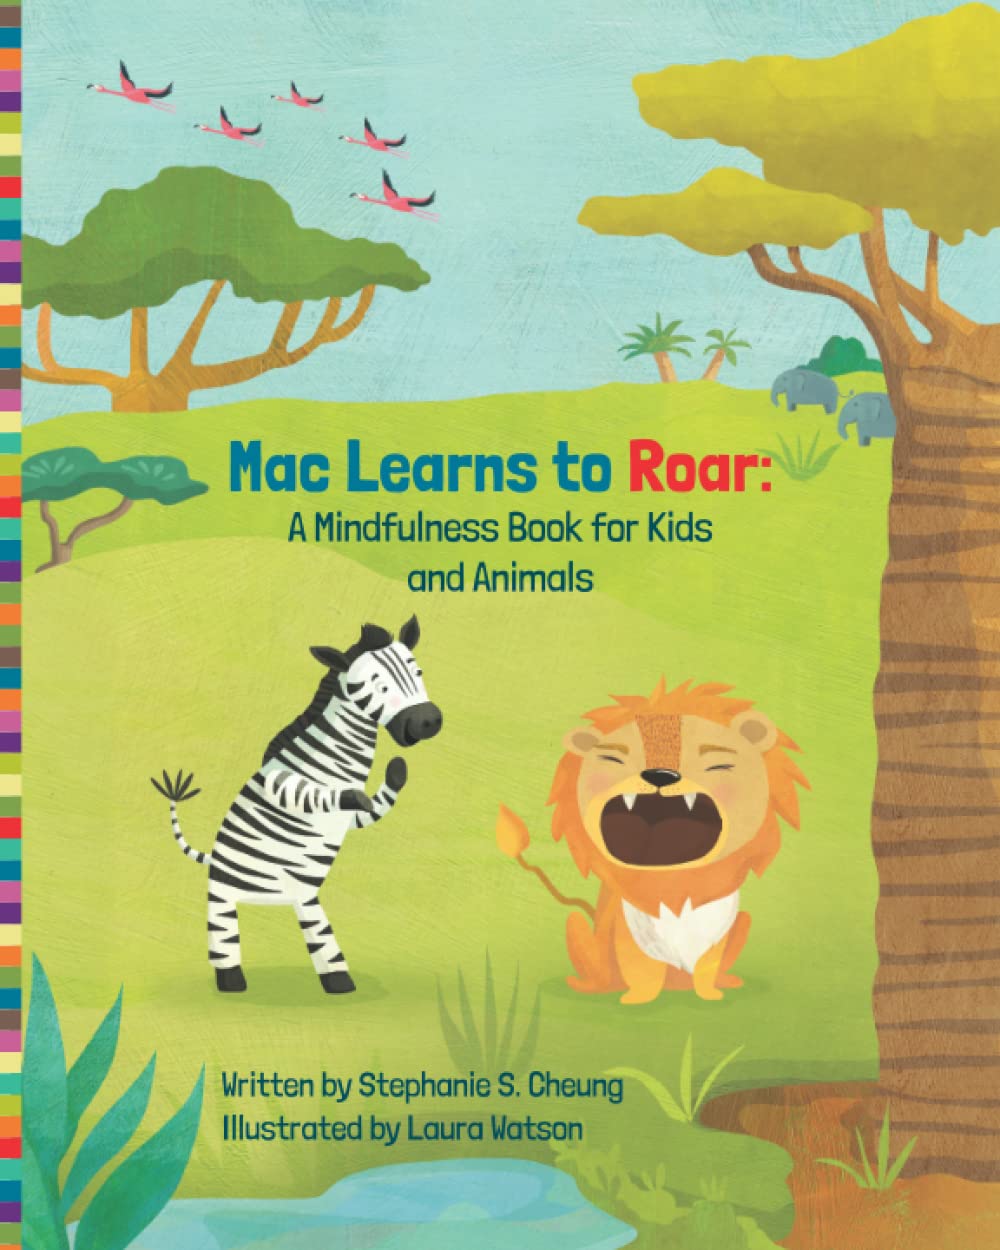 Mac Learns to Roar: A Mindfulness Book for Kids and Animals